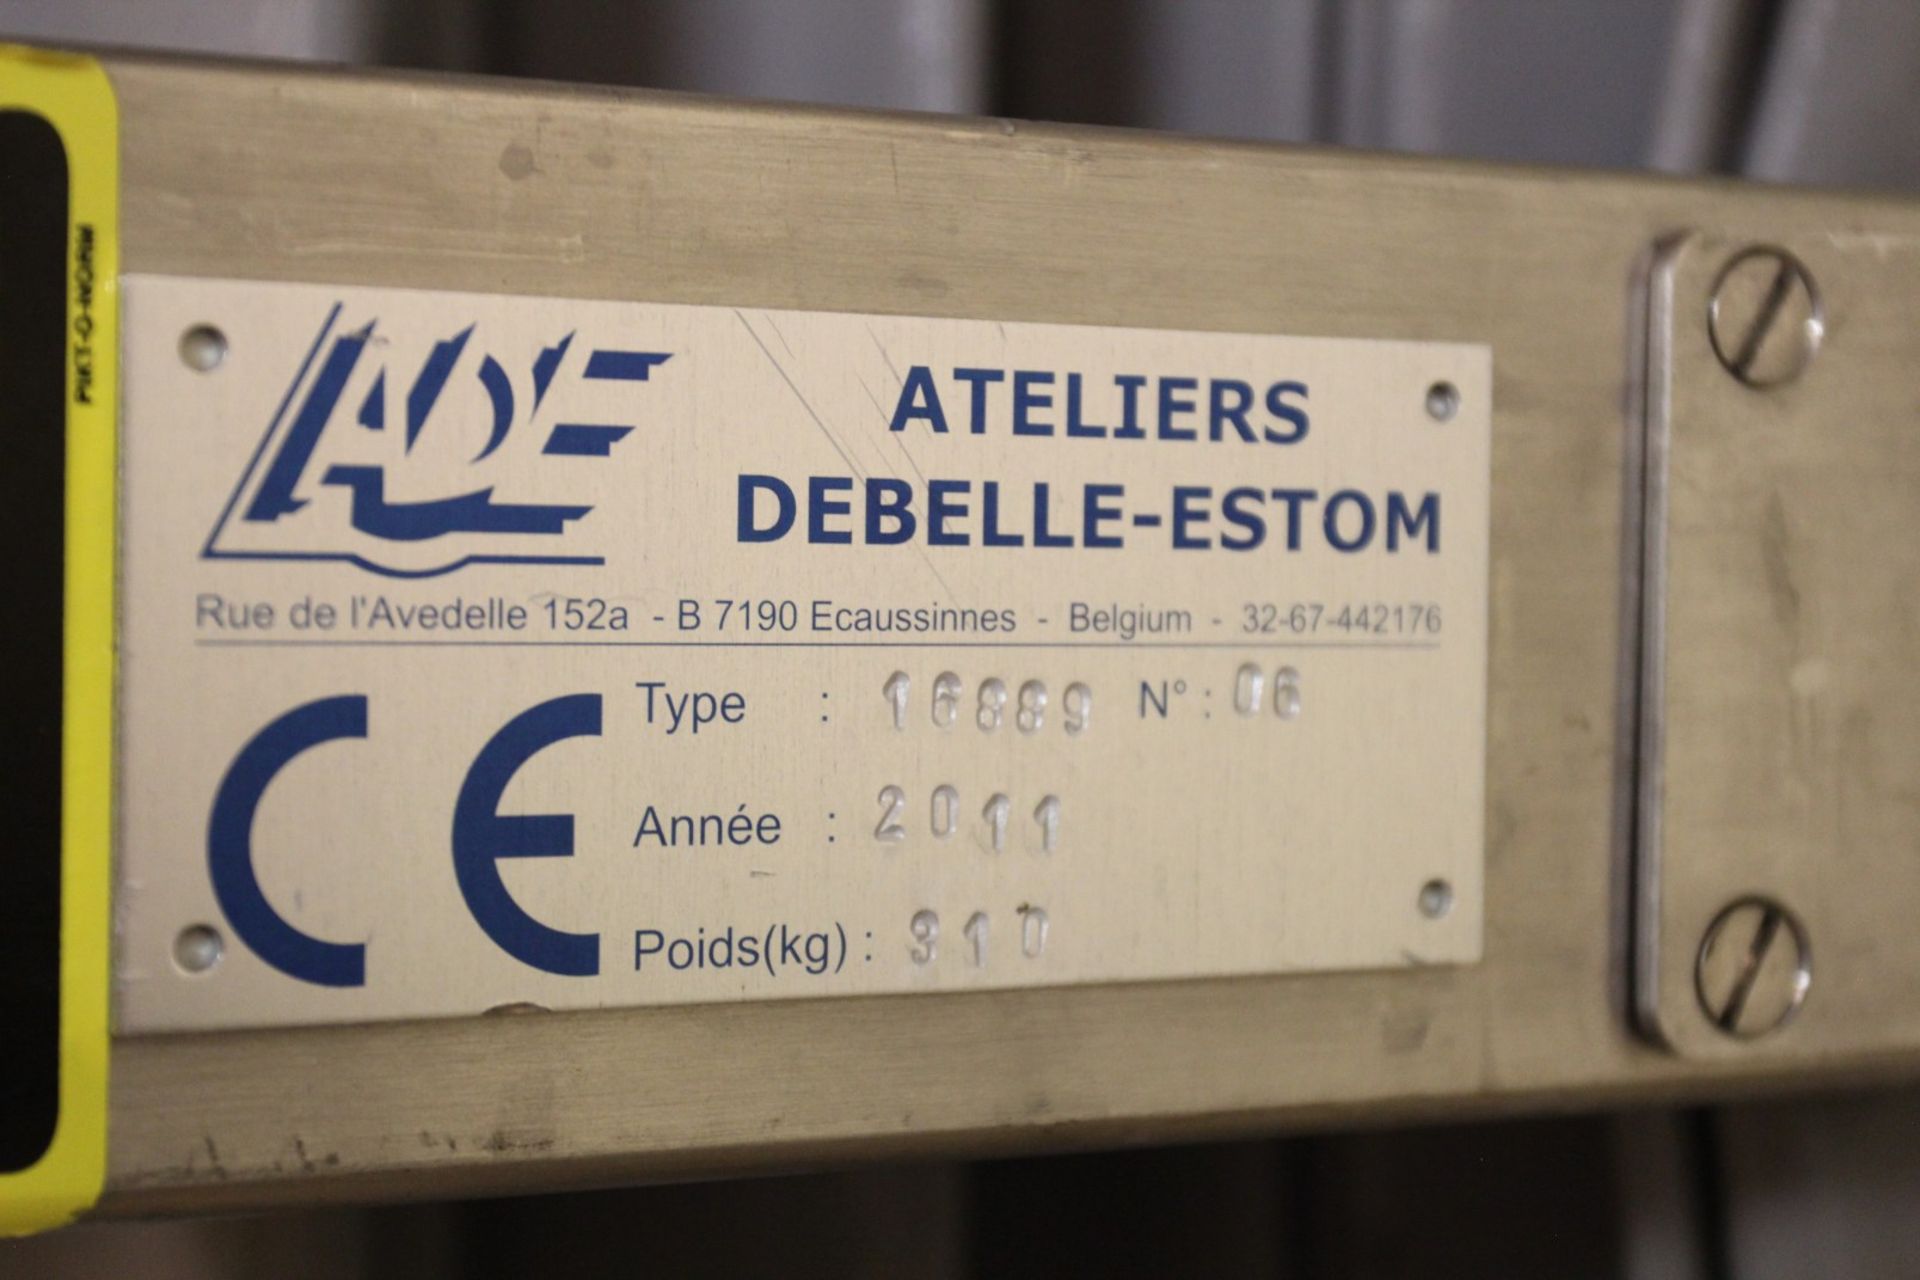 2011 ADE Ateliers Debelle-Estom 16889 Mobile Electric Lift Table, s/n 06 - Image 3 of 4